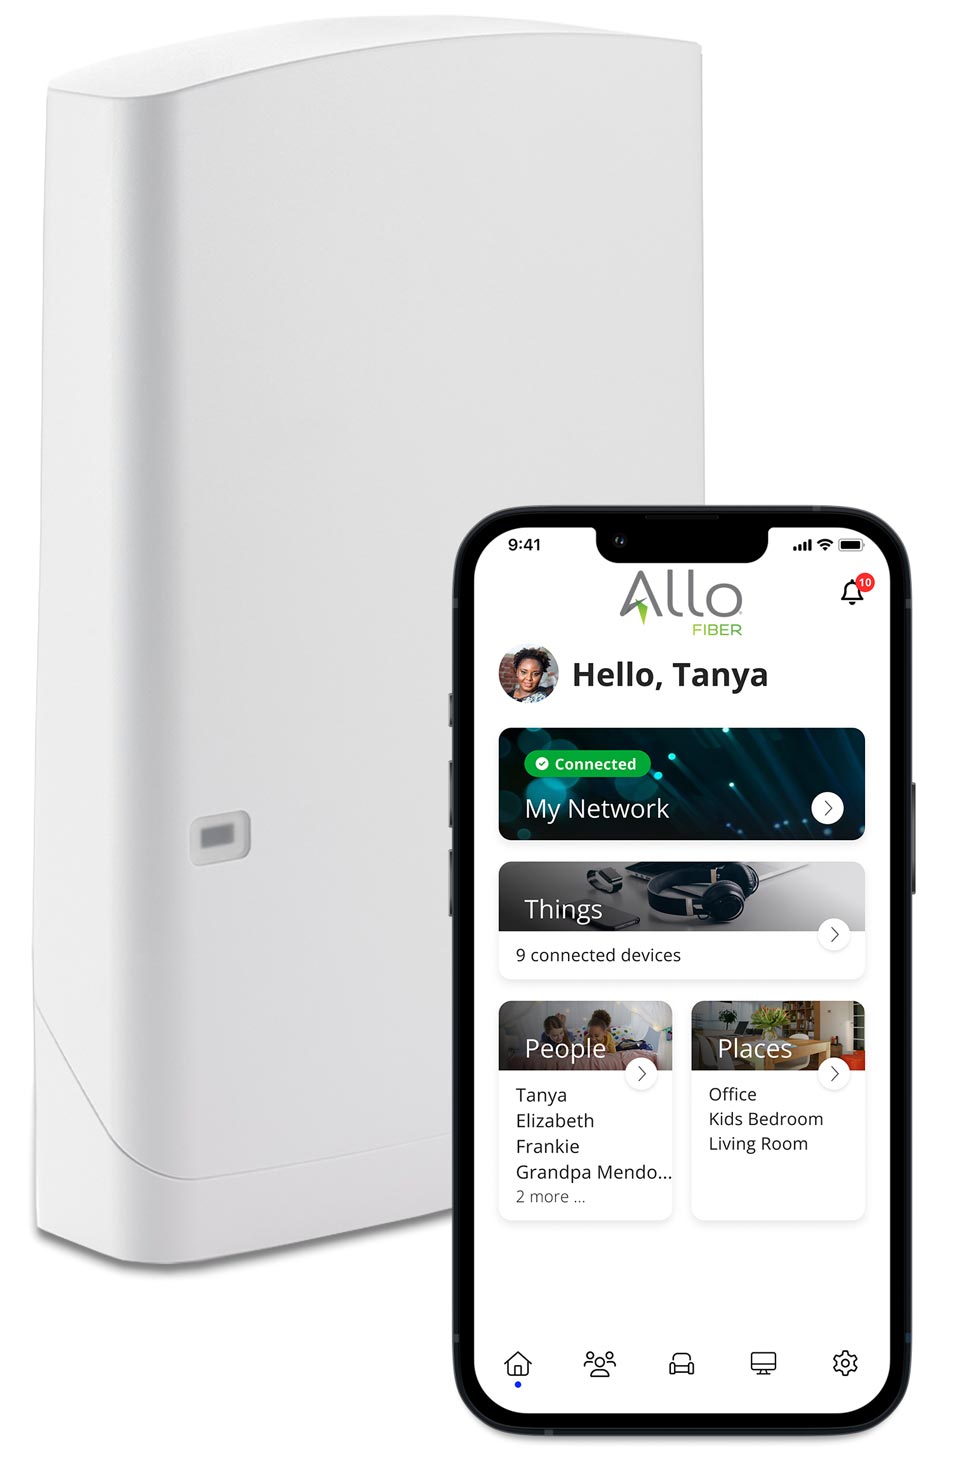 Introducing Outdoor Essentials, the new water resistant outdoor high-speed wi-fi extender system from ALLO Fiber.